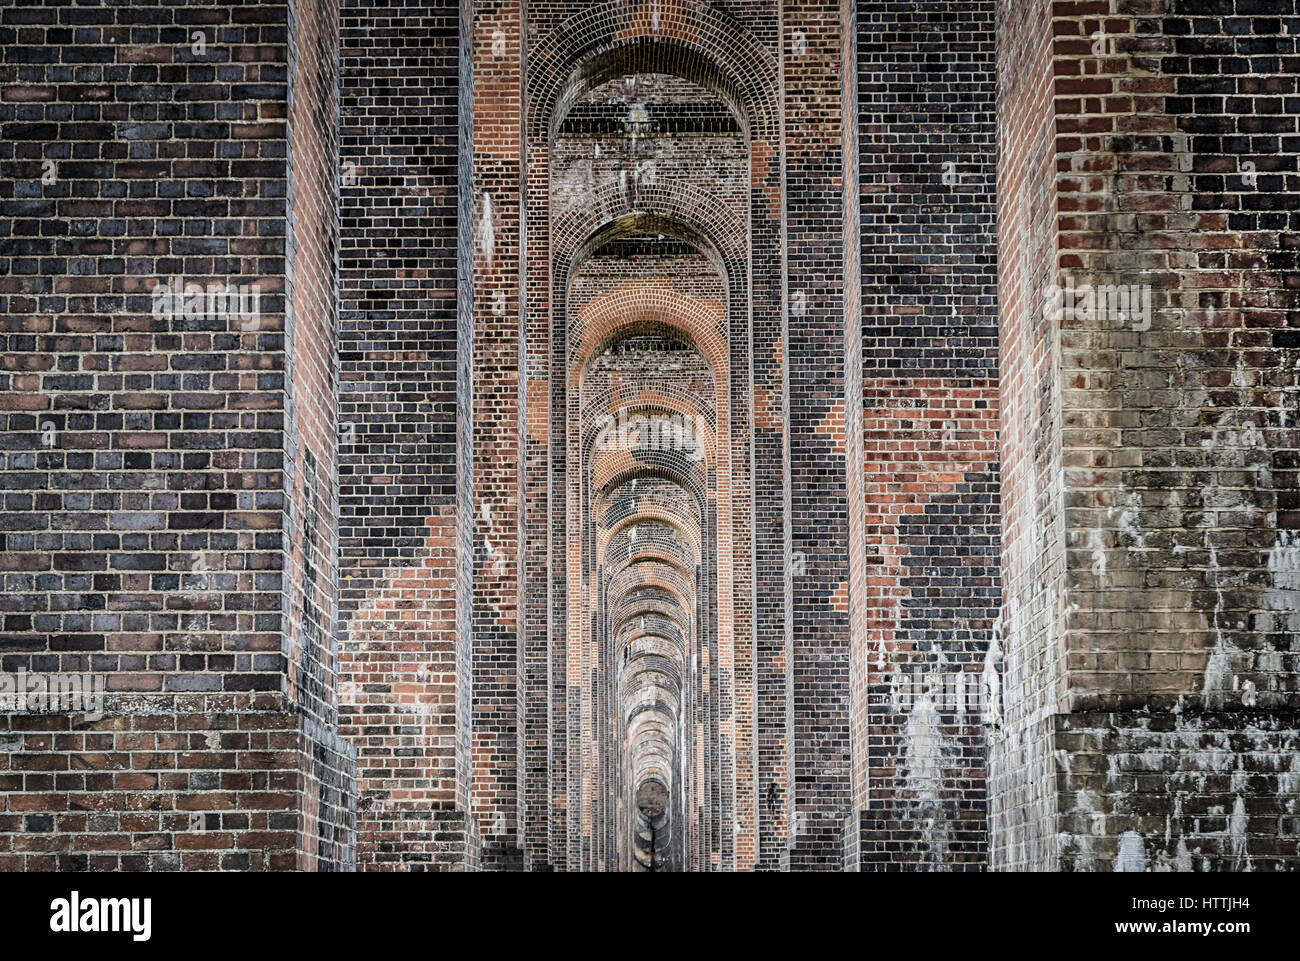 View through the brickwork and soffits of the Ouse Valley (Balcombe) Viaduct in West Sussex, UK Stock Photo